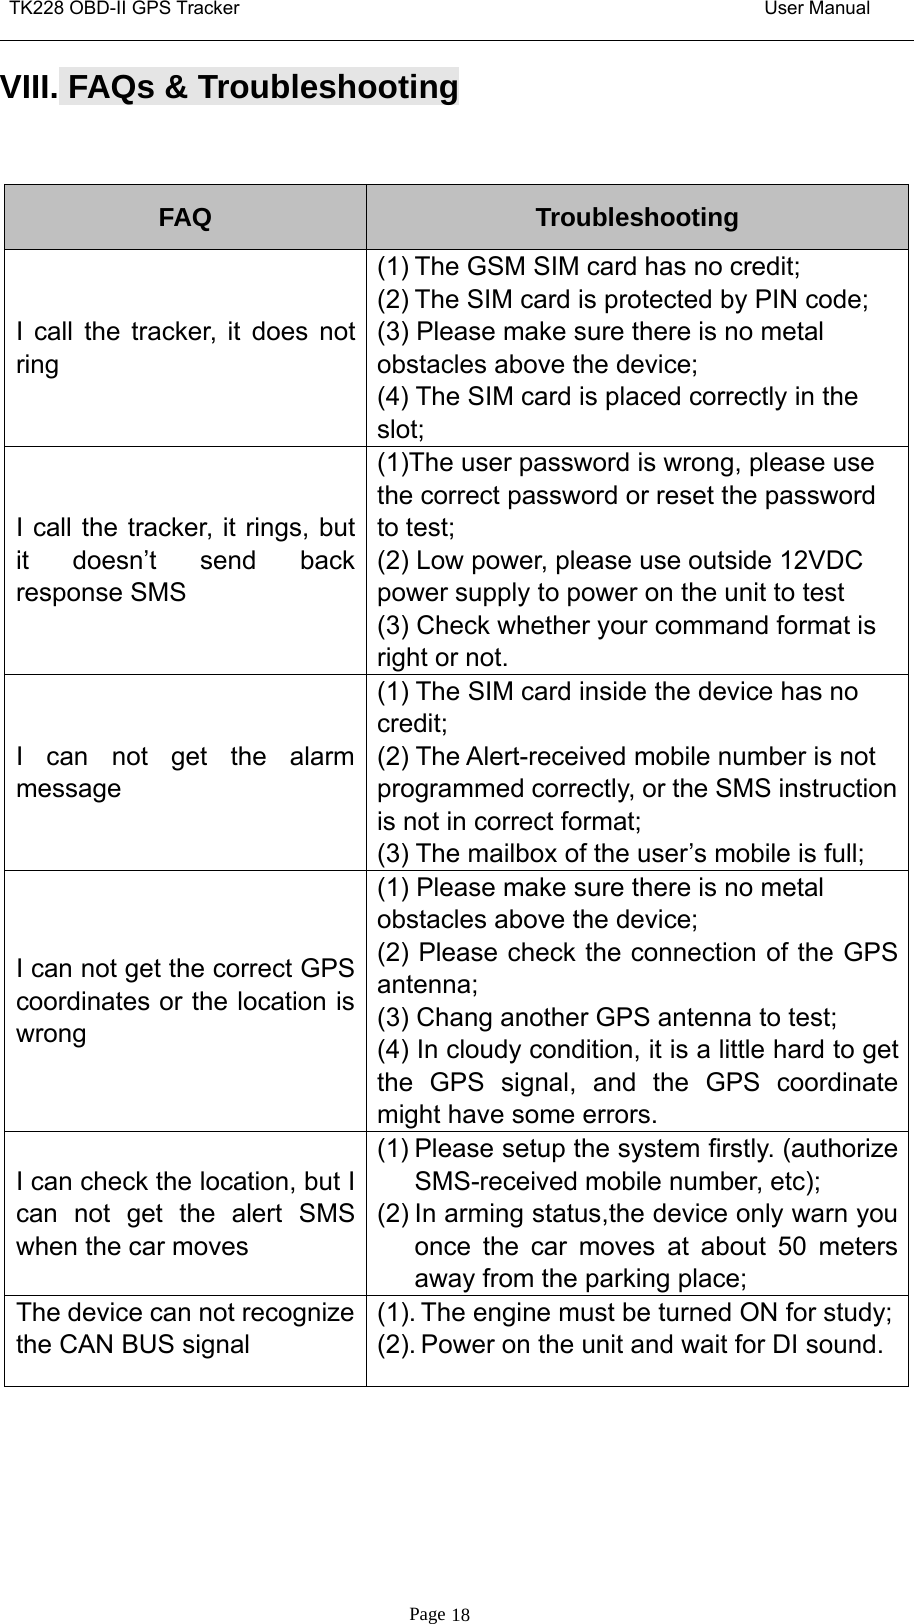 TK228 OBD-II GPS Tracker User ManualPage 18VIII. FAQs &amp;TroubleshootingFAQ TroubleshootingI call the tracker, it does notring(1) The GSM SIM card has no credit;(2) The SIM card is protected by PIN code;(3) Please make sure there is no metalobstacles above the device;(4) The SIM card is placed correctly in theslot;I call the tracker, it rings, butit doesn’t send backresponse SMS(1)The user password is wrong, please usethe correct password or reset the passwordto test;(2) Low power, please use outside 12VDCpower supply to power on the unit to test(3) Check whether your command format isright or not.I can not get the alarmmessage(1) The SIM card inside the device has nocredit;(2) The Alert-received mobile number is notprogrammed correctly, or the SMS instructionis not in correct format;(3) The mailbox of the user’s mobile is full;I can not get the correct GPScoordinates or the location iswrong(1) Please make sure there is no metalobstacles above the device;(2) Please check the connection of the GPSantenna;(3) Chang another GPS antenna to test;(4) In cloudy condition, it is a little hard to getthe GPS signal, and the GPS coordinatemight have some errors.I can check the location, but Ican not get the alert SMSwhen the car moves(1) Please setup the system firstly. (authorizeSMS-received mobile number, etc);(2) In arming status,the device only warn youonce the car moves at about 50 metersaway from the parking place;The device can not recognizethe CAN BUS signal(1). The engine must be turned ON for study;(2). Power on the unit and wait for DI sound.